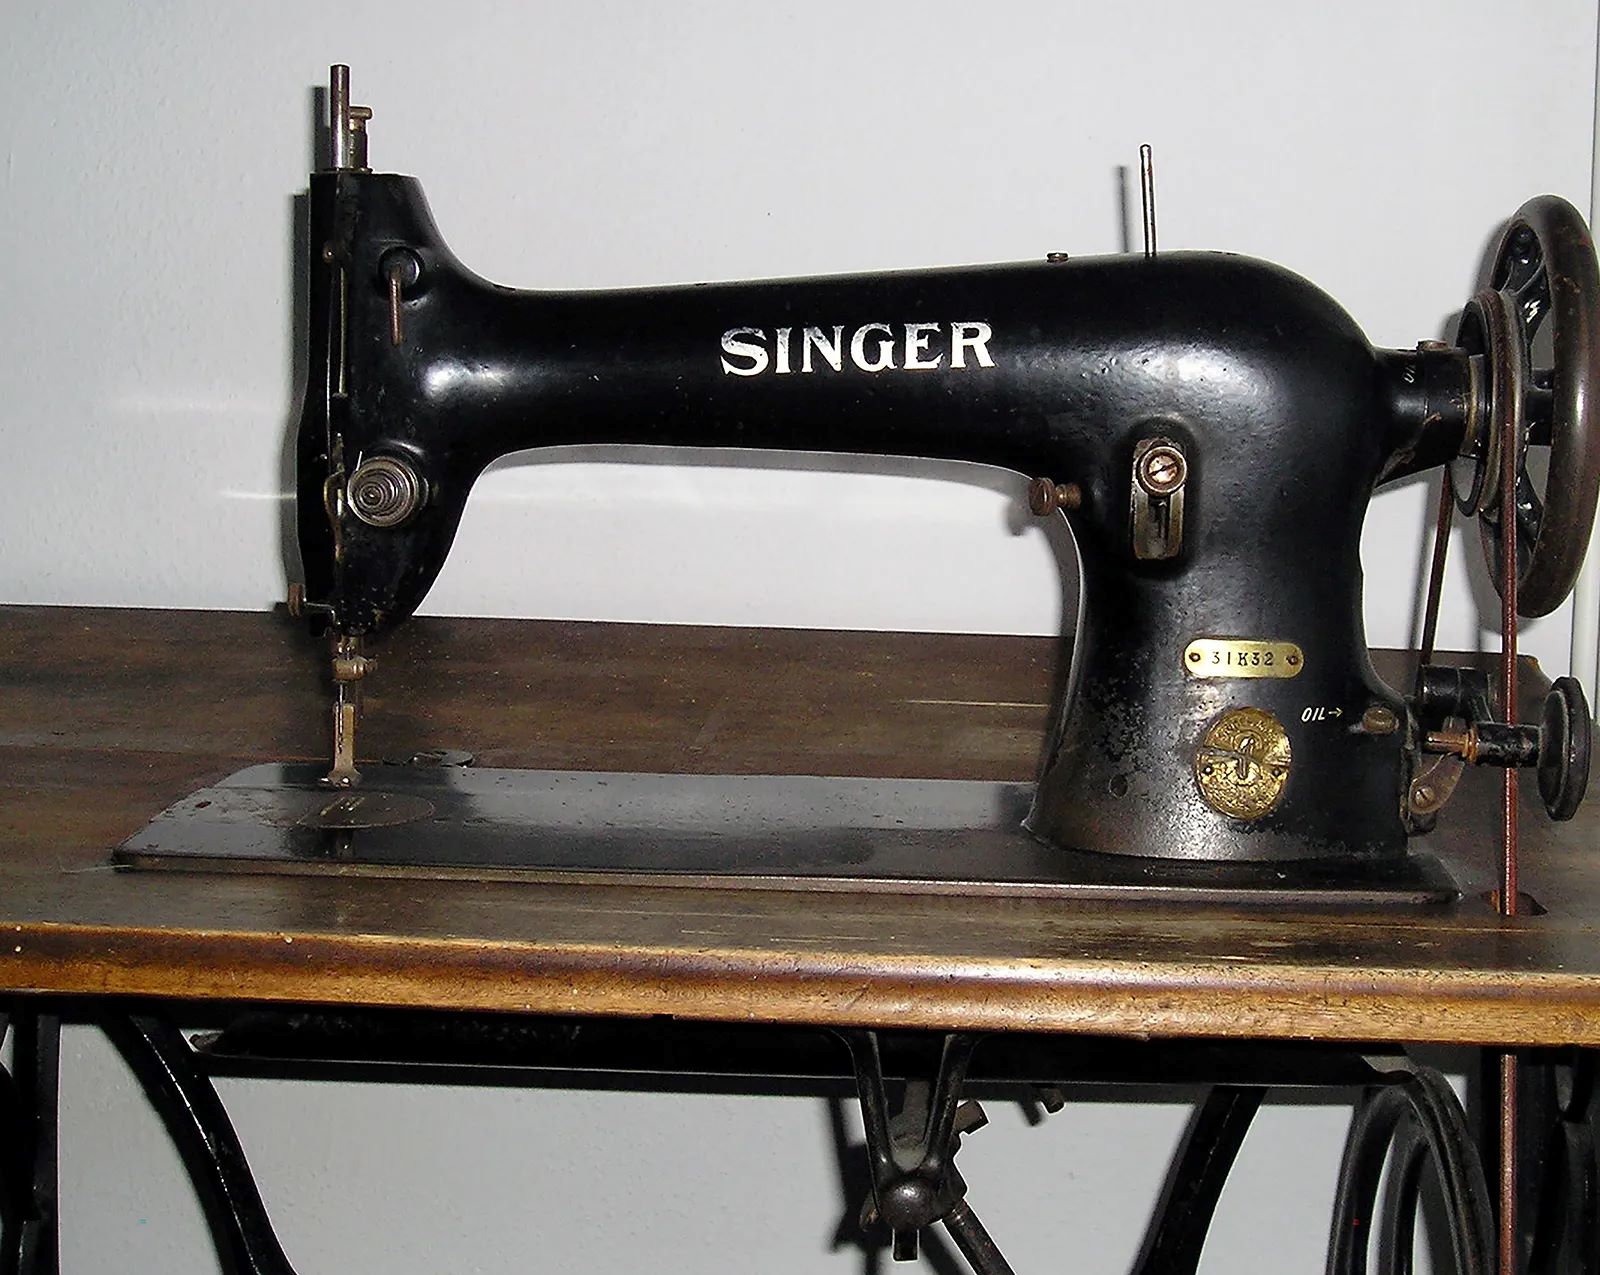 How to use a computerized sewing machine? - Knowledge